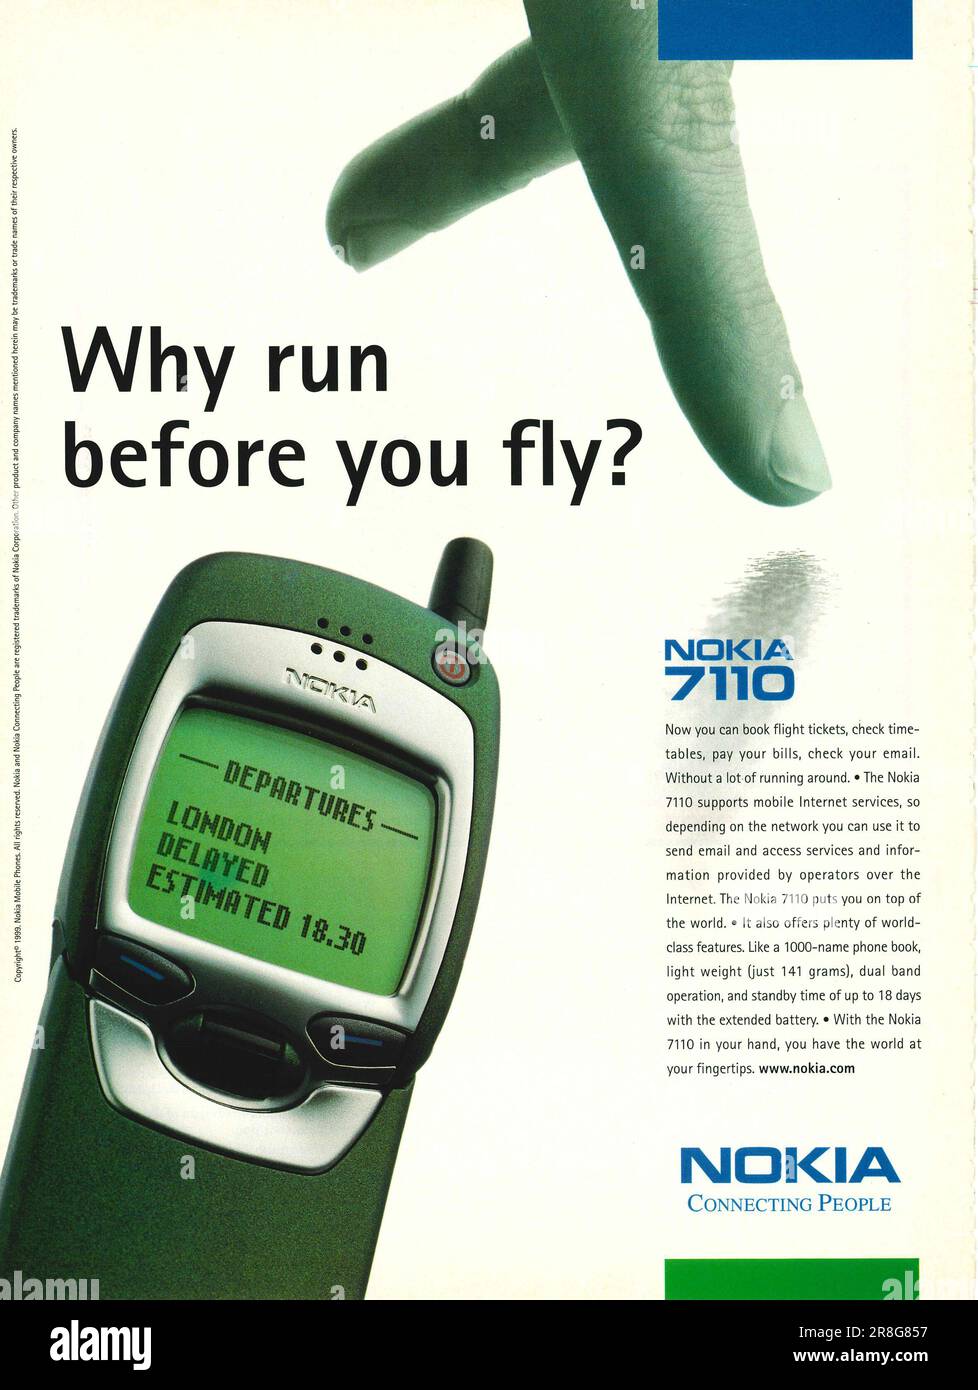 Nokia 7110 mobile phone advert. Nokia Connecting people advertisement in a magazine 1999. Why run before you fly slogan. Stock Photo